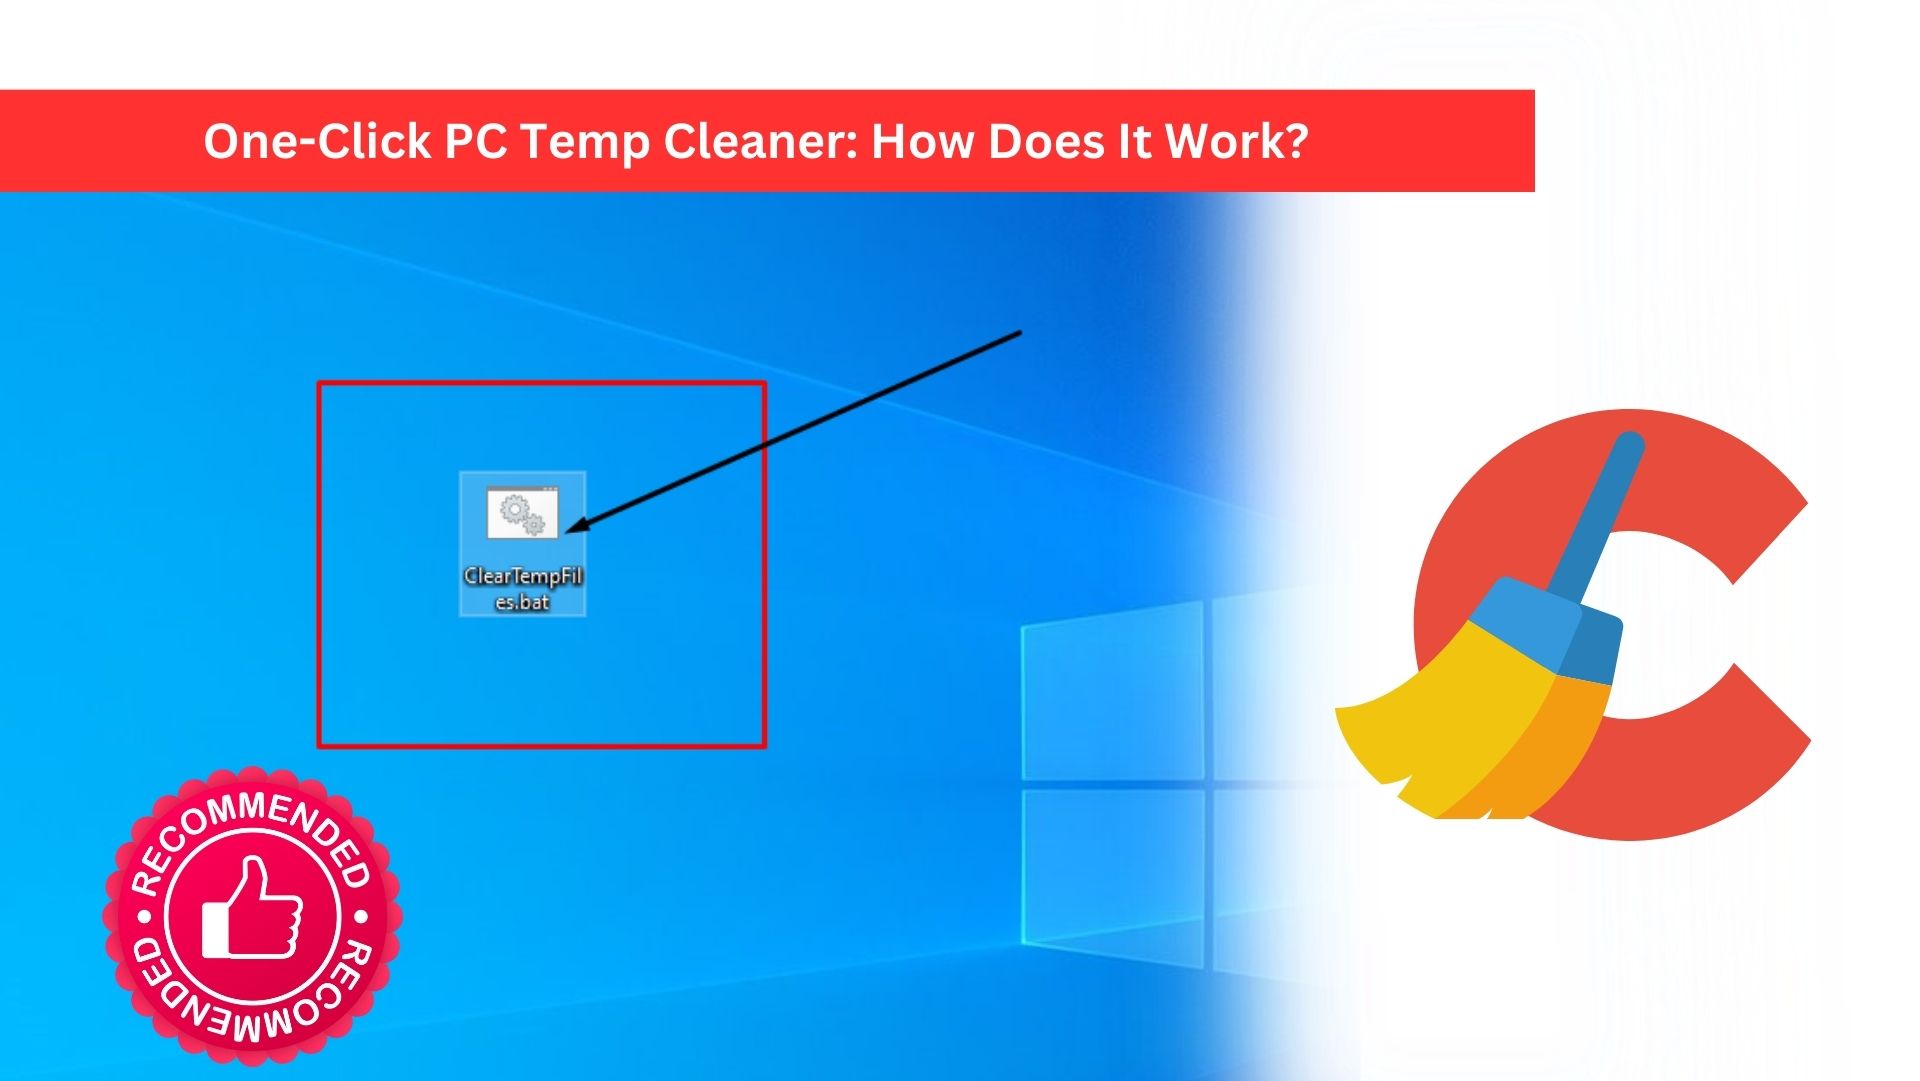 One-Click PC Temp Cleaner How Does It Work